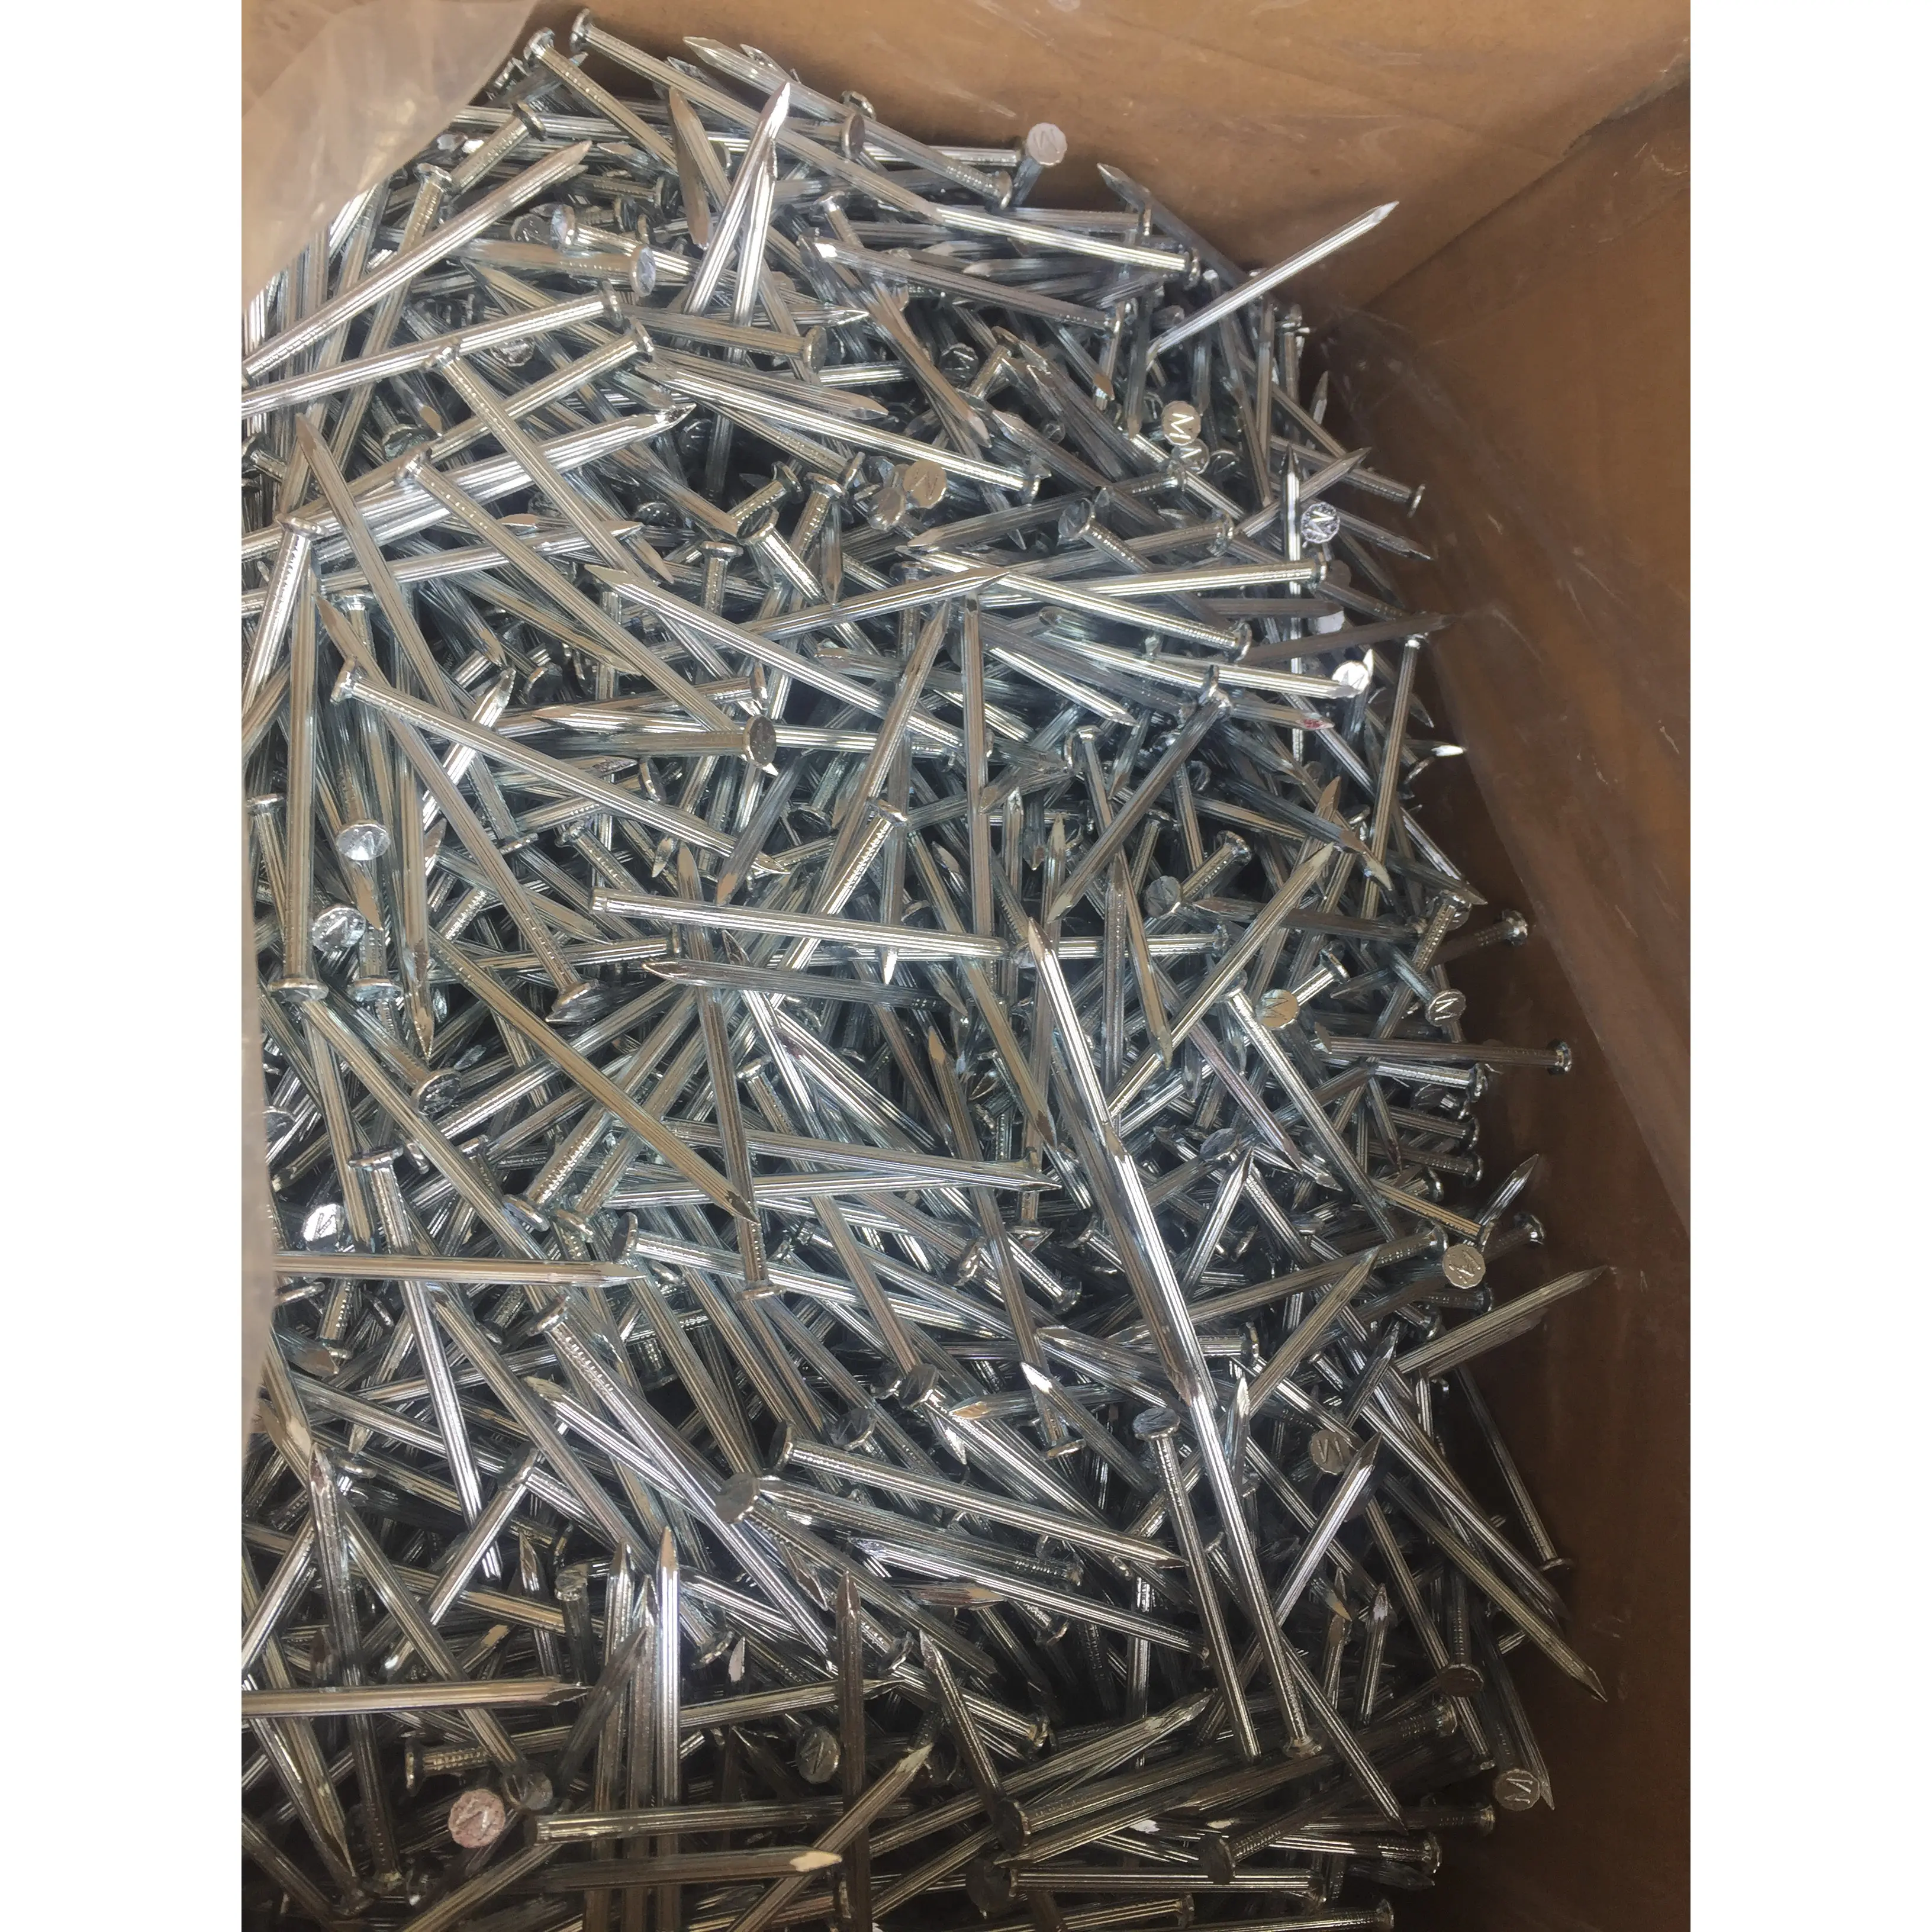 China cheap strong wire nails 3" 4" inch concrete iron nails hardened galvanized steel concrete nails price for construction